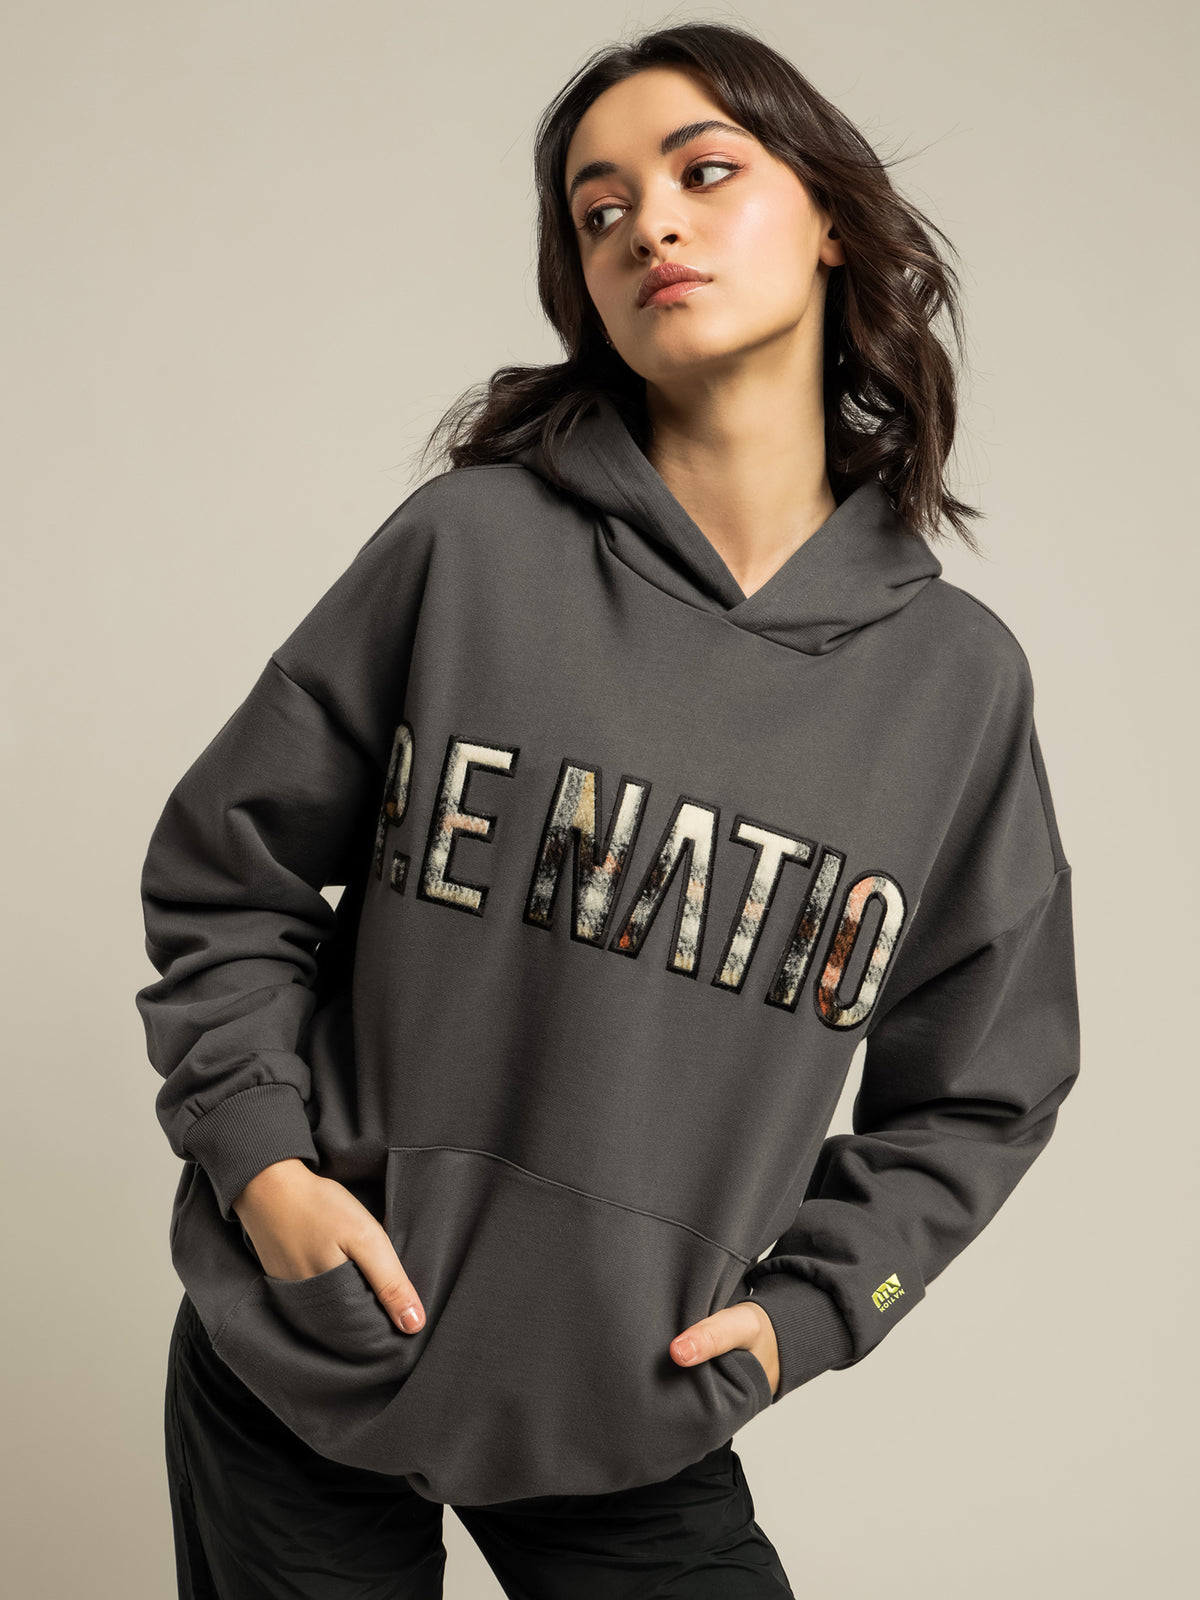 Alliance Hoodie in Charcoal